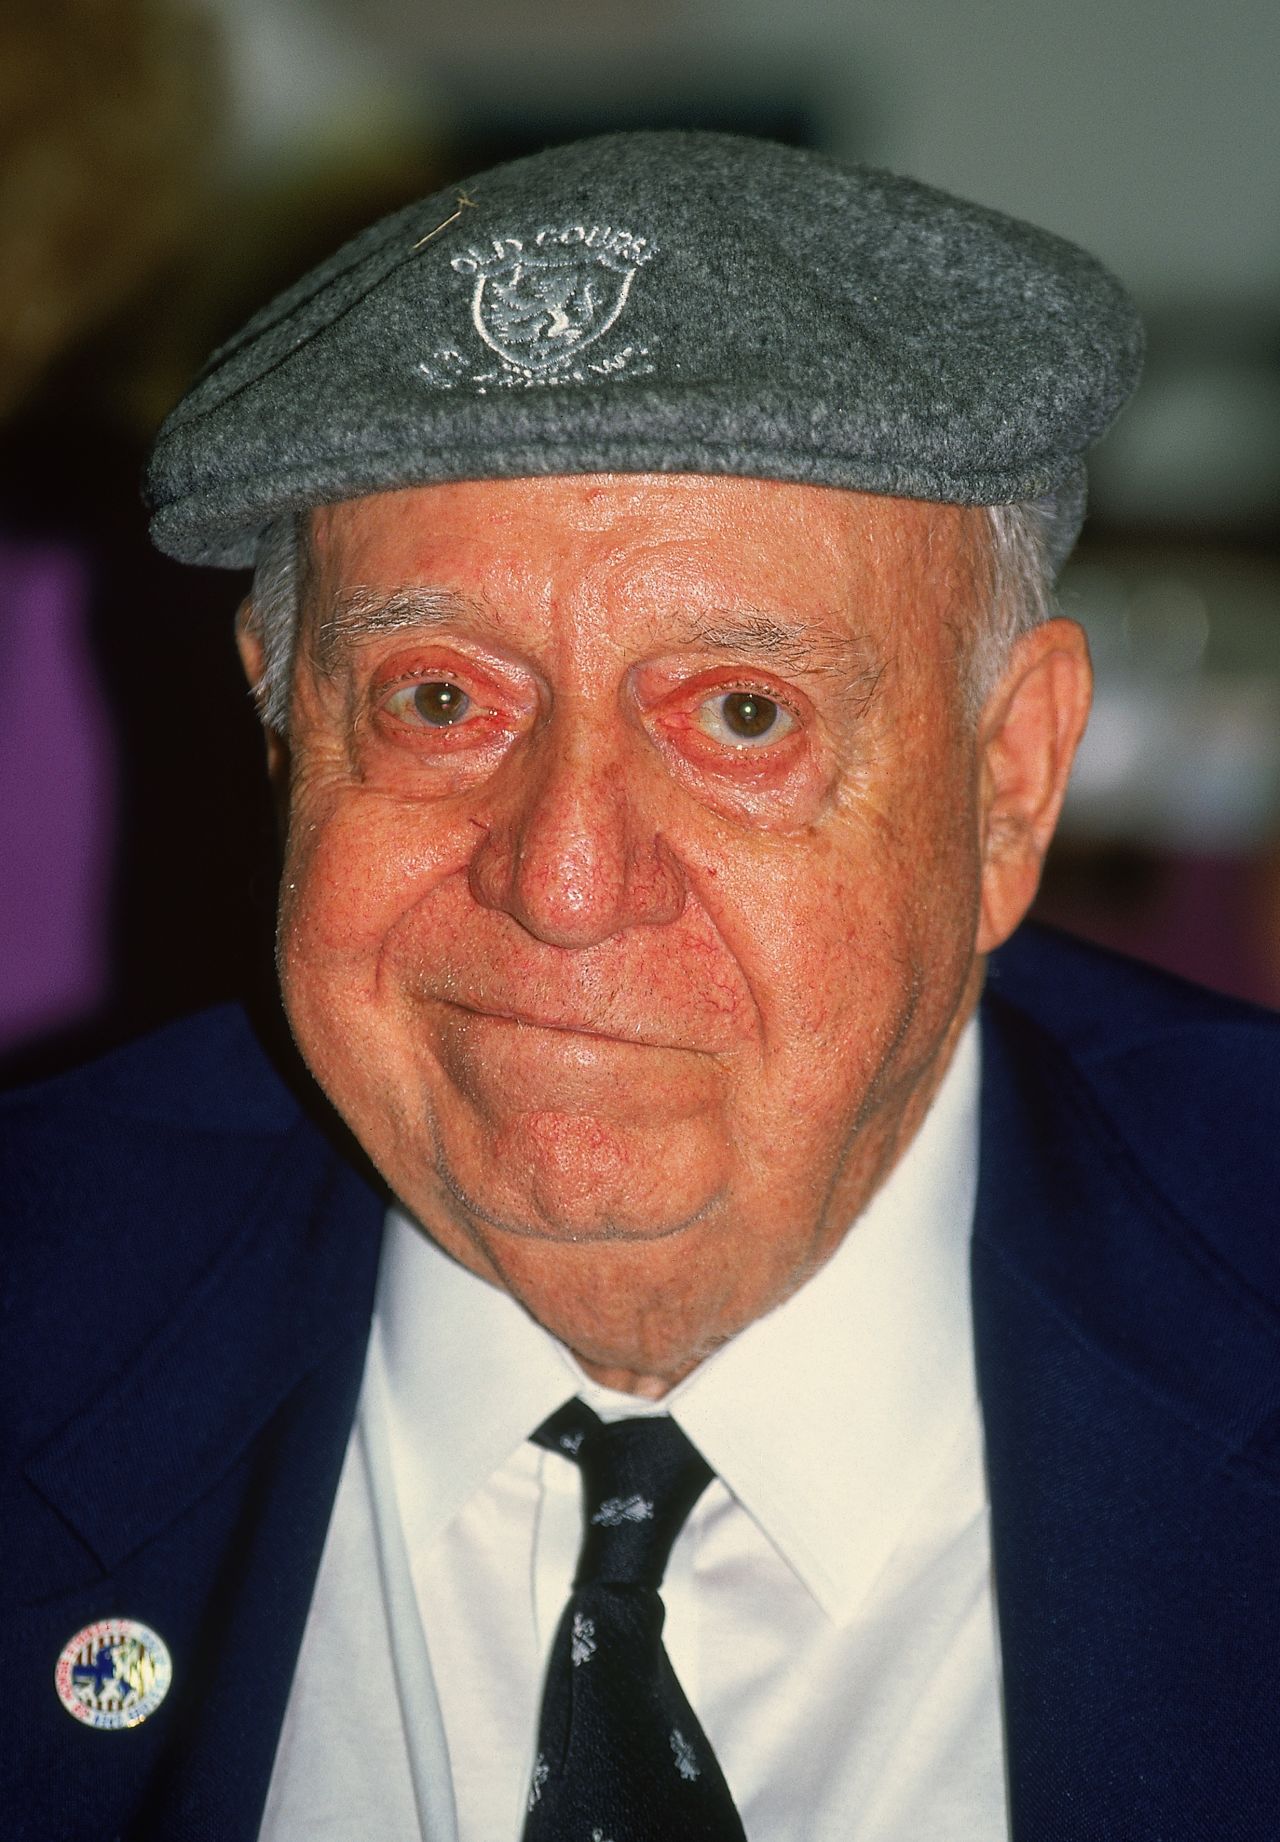 Hazeltine was created by Robert Trent Jones Sr. -- Rees' father -- who is pictured at the 1991 US Open.